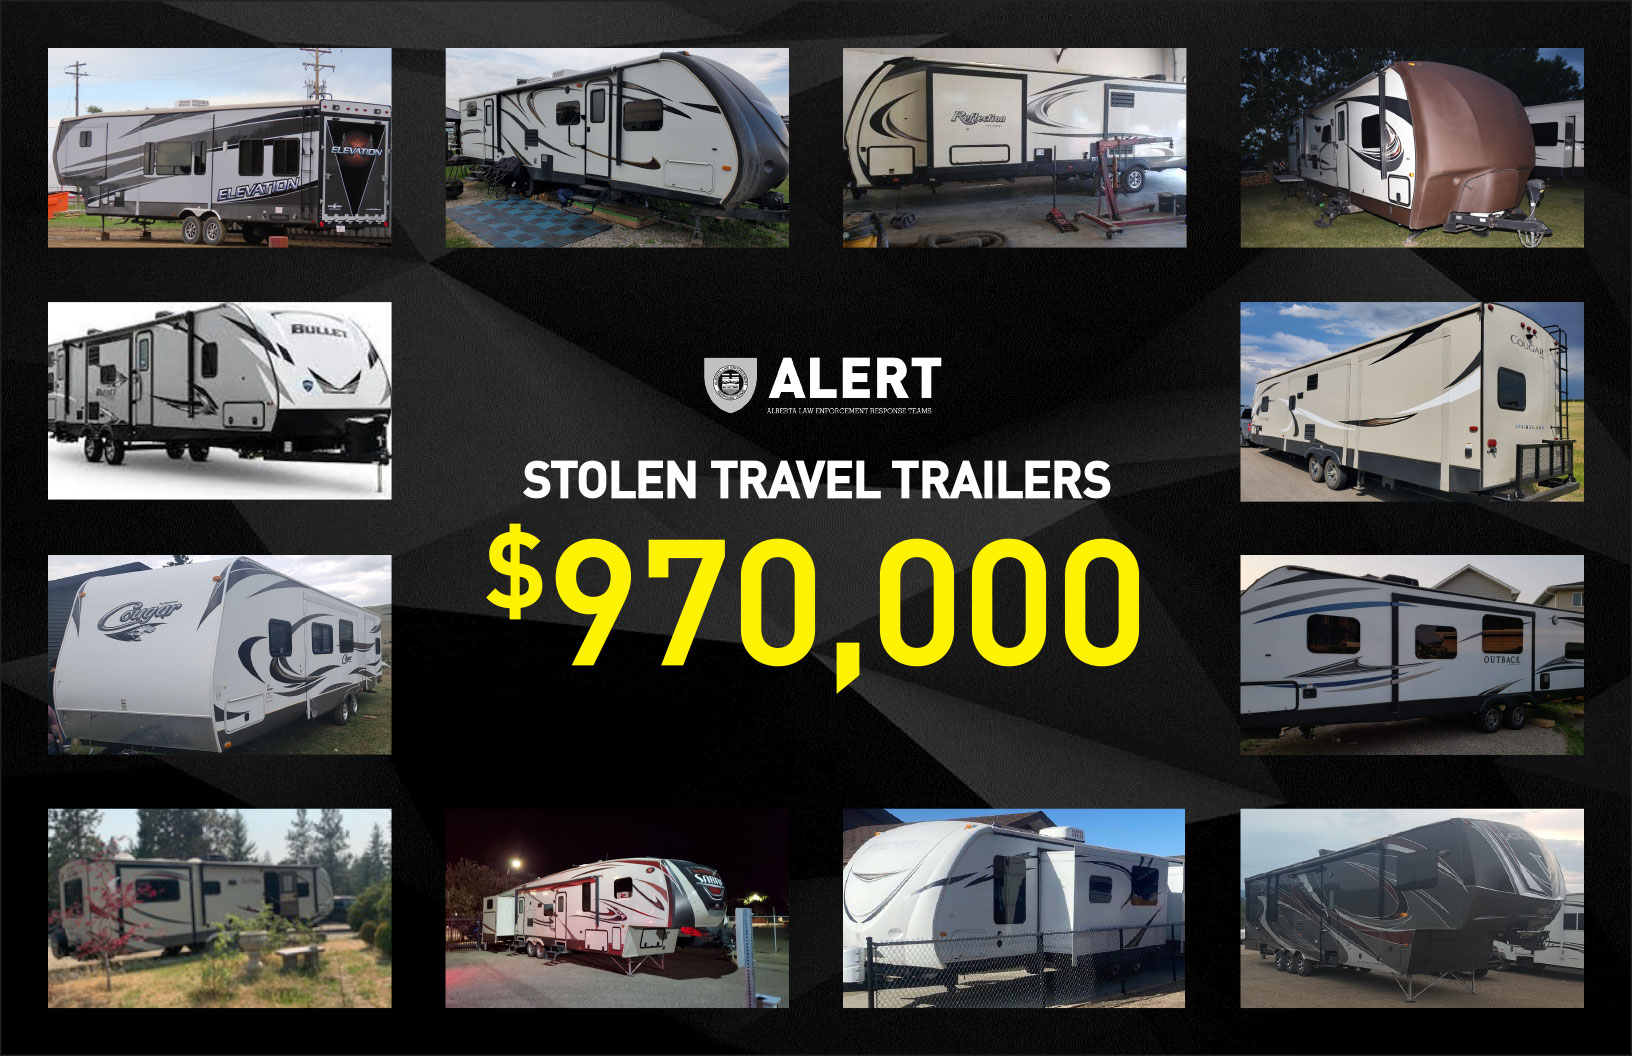 Nearly $1 million in stolen trailers recovered